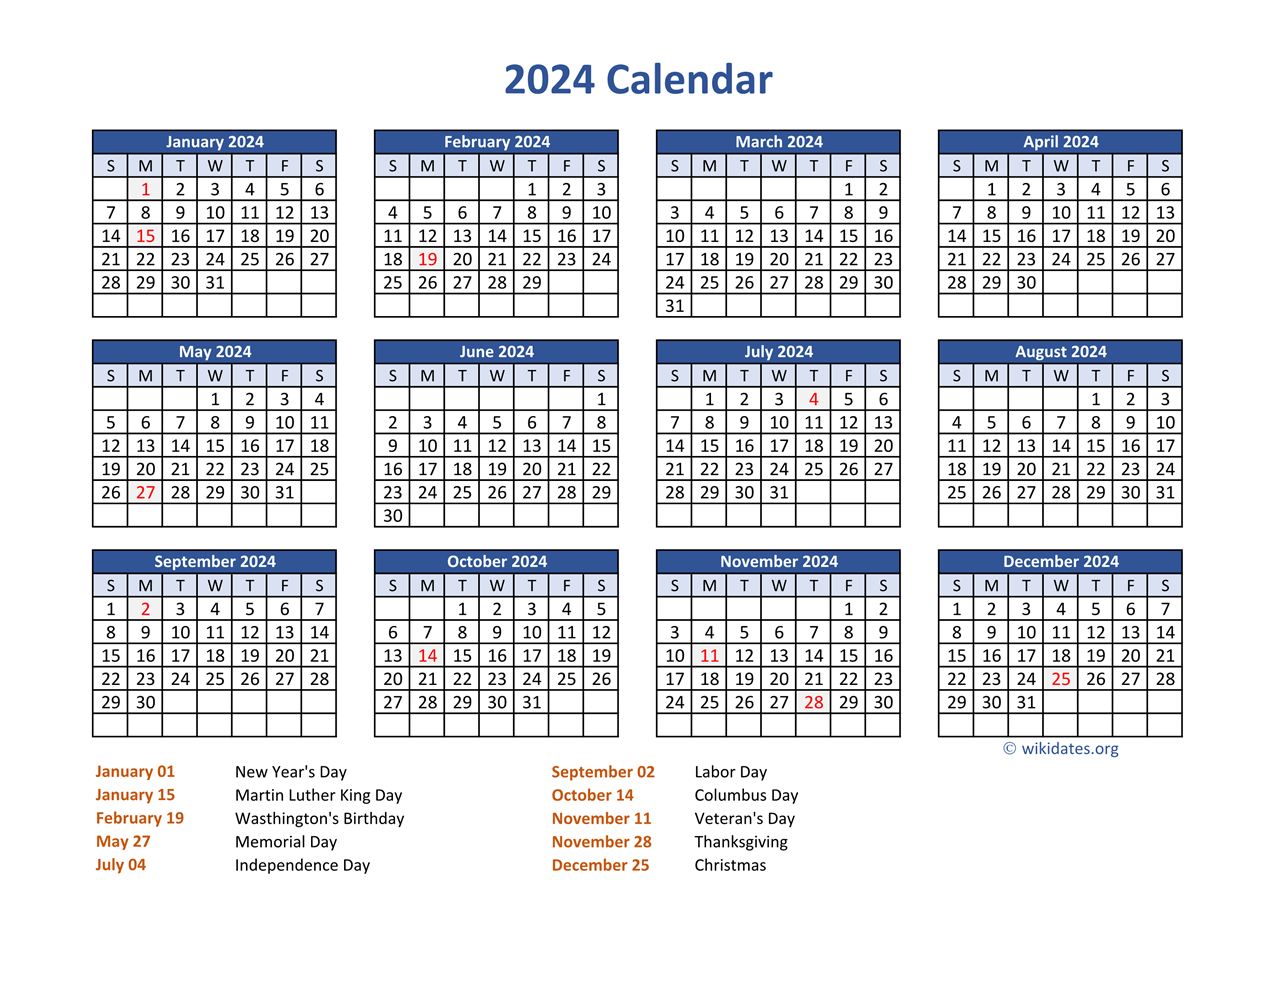 Pdf Calendar 2024 With Federal Holidays | Wikidates for Printable 2024 Calendar With Us Holidays